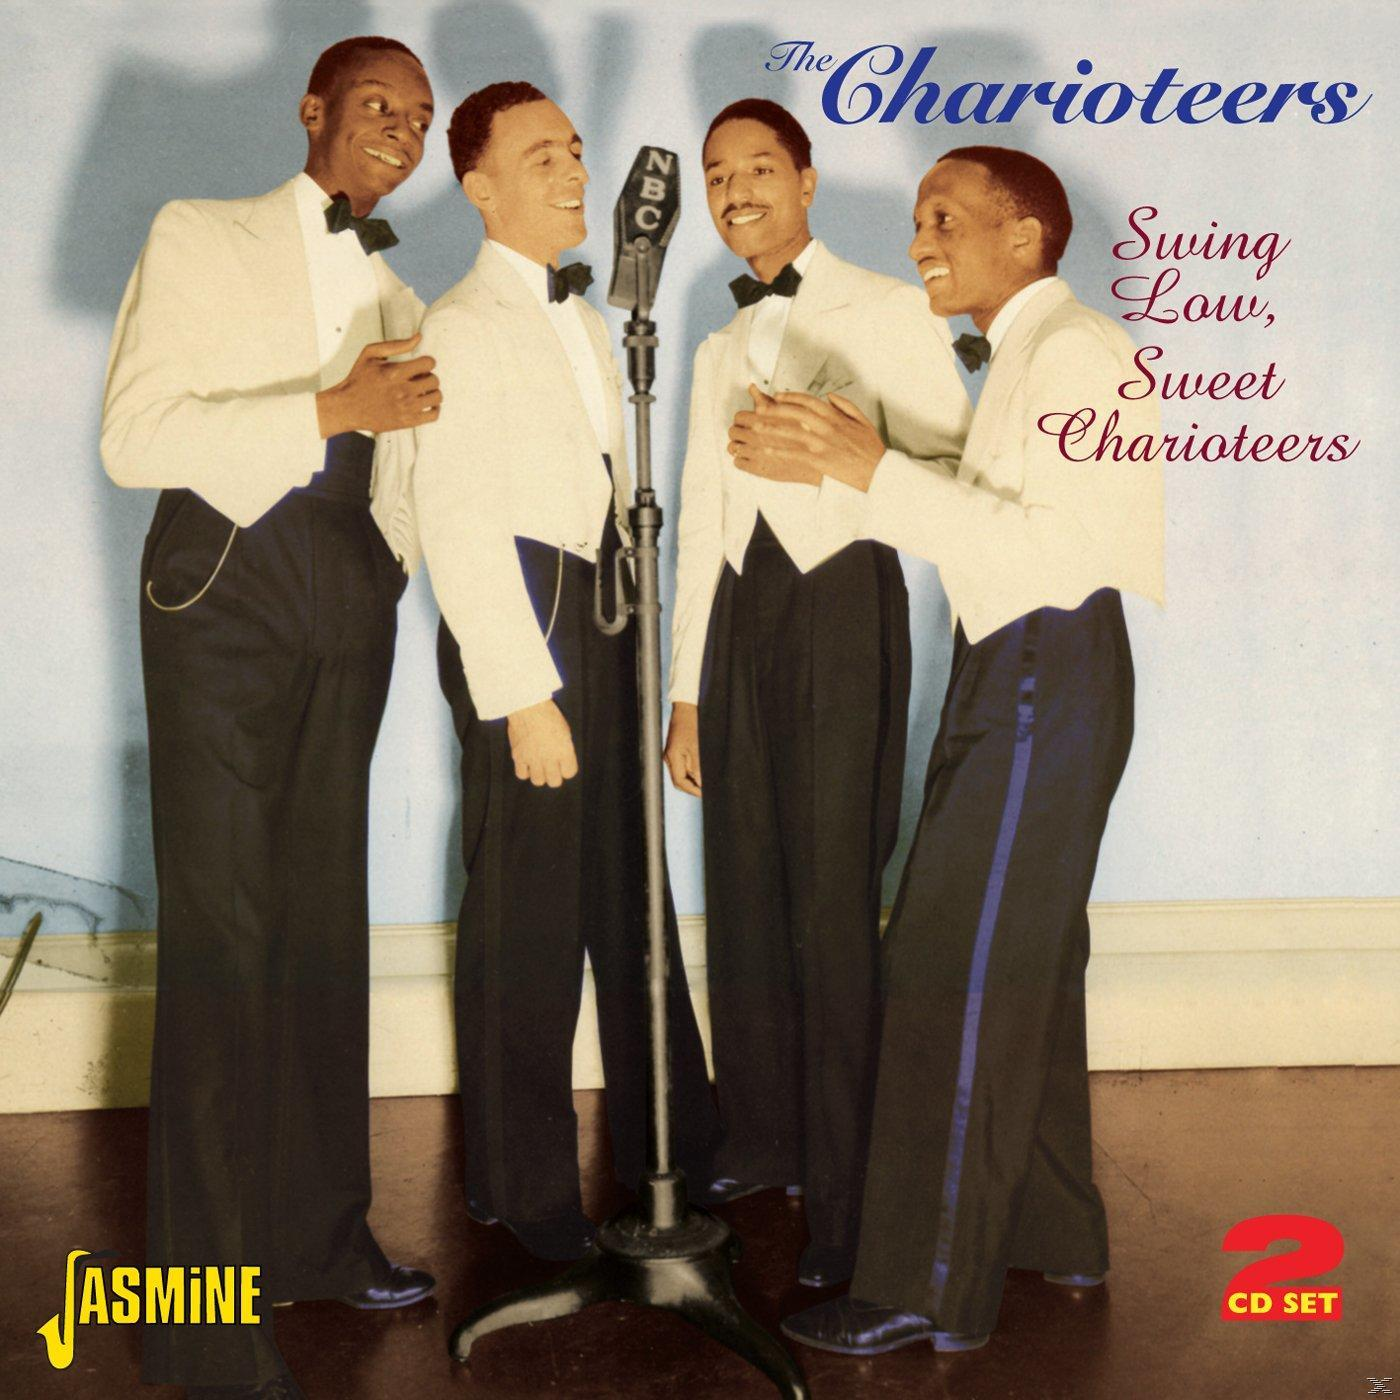 The Charioteers LOW (CD) - SWEET - CHARIOTEE SWING